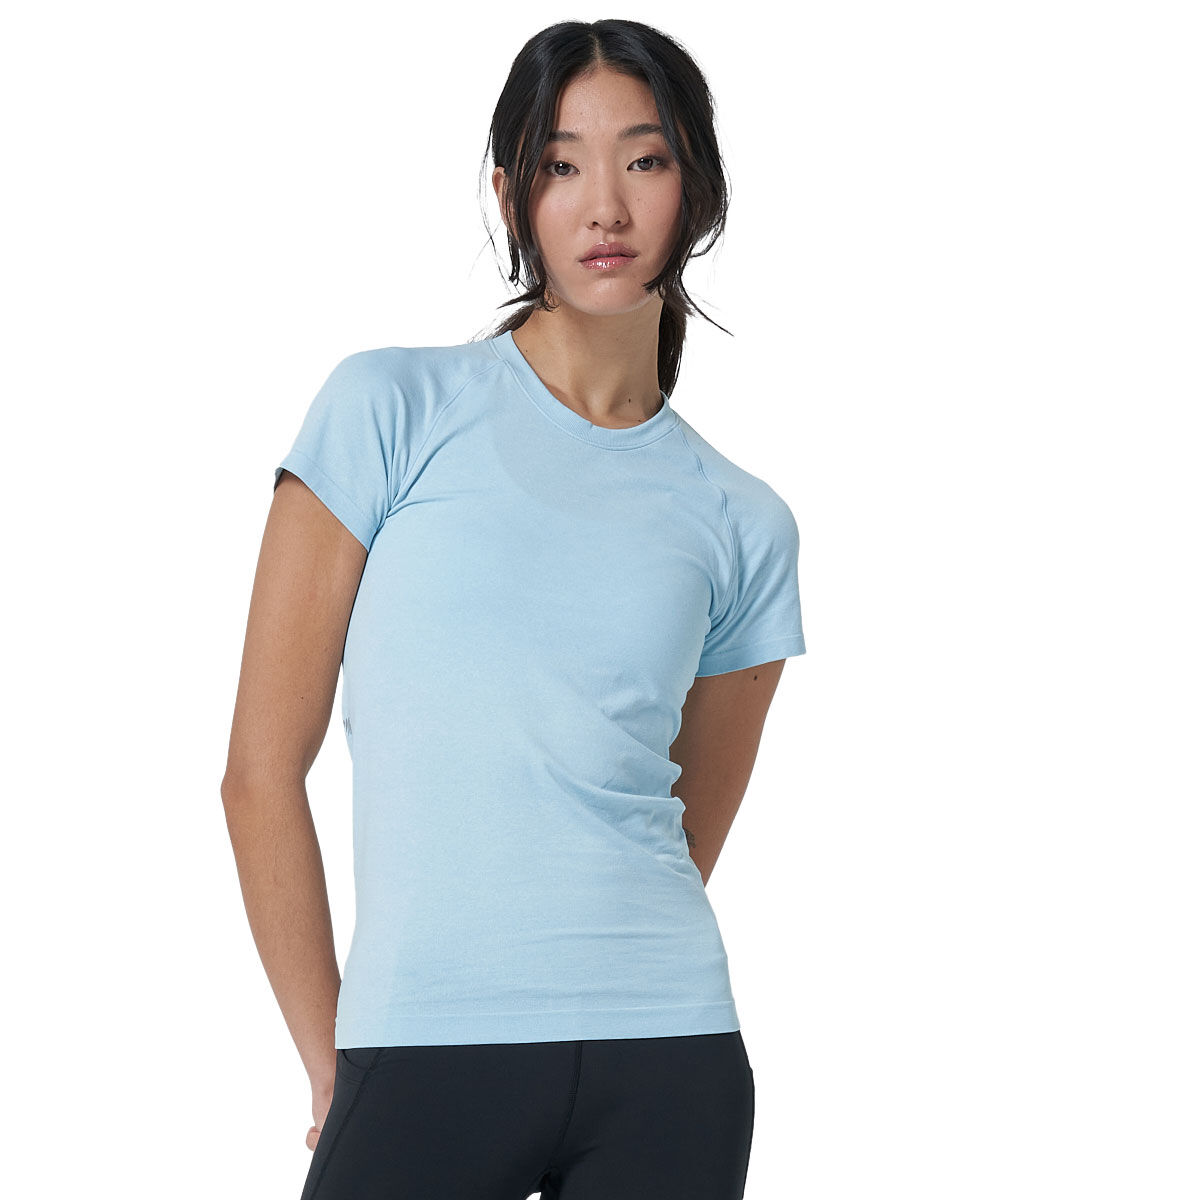 ELL&VOO Women's Tees & Tops - Sports T-Shirts & more - rebel